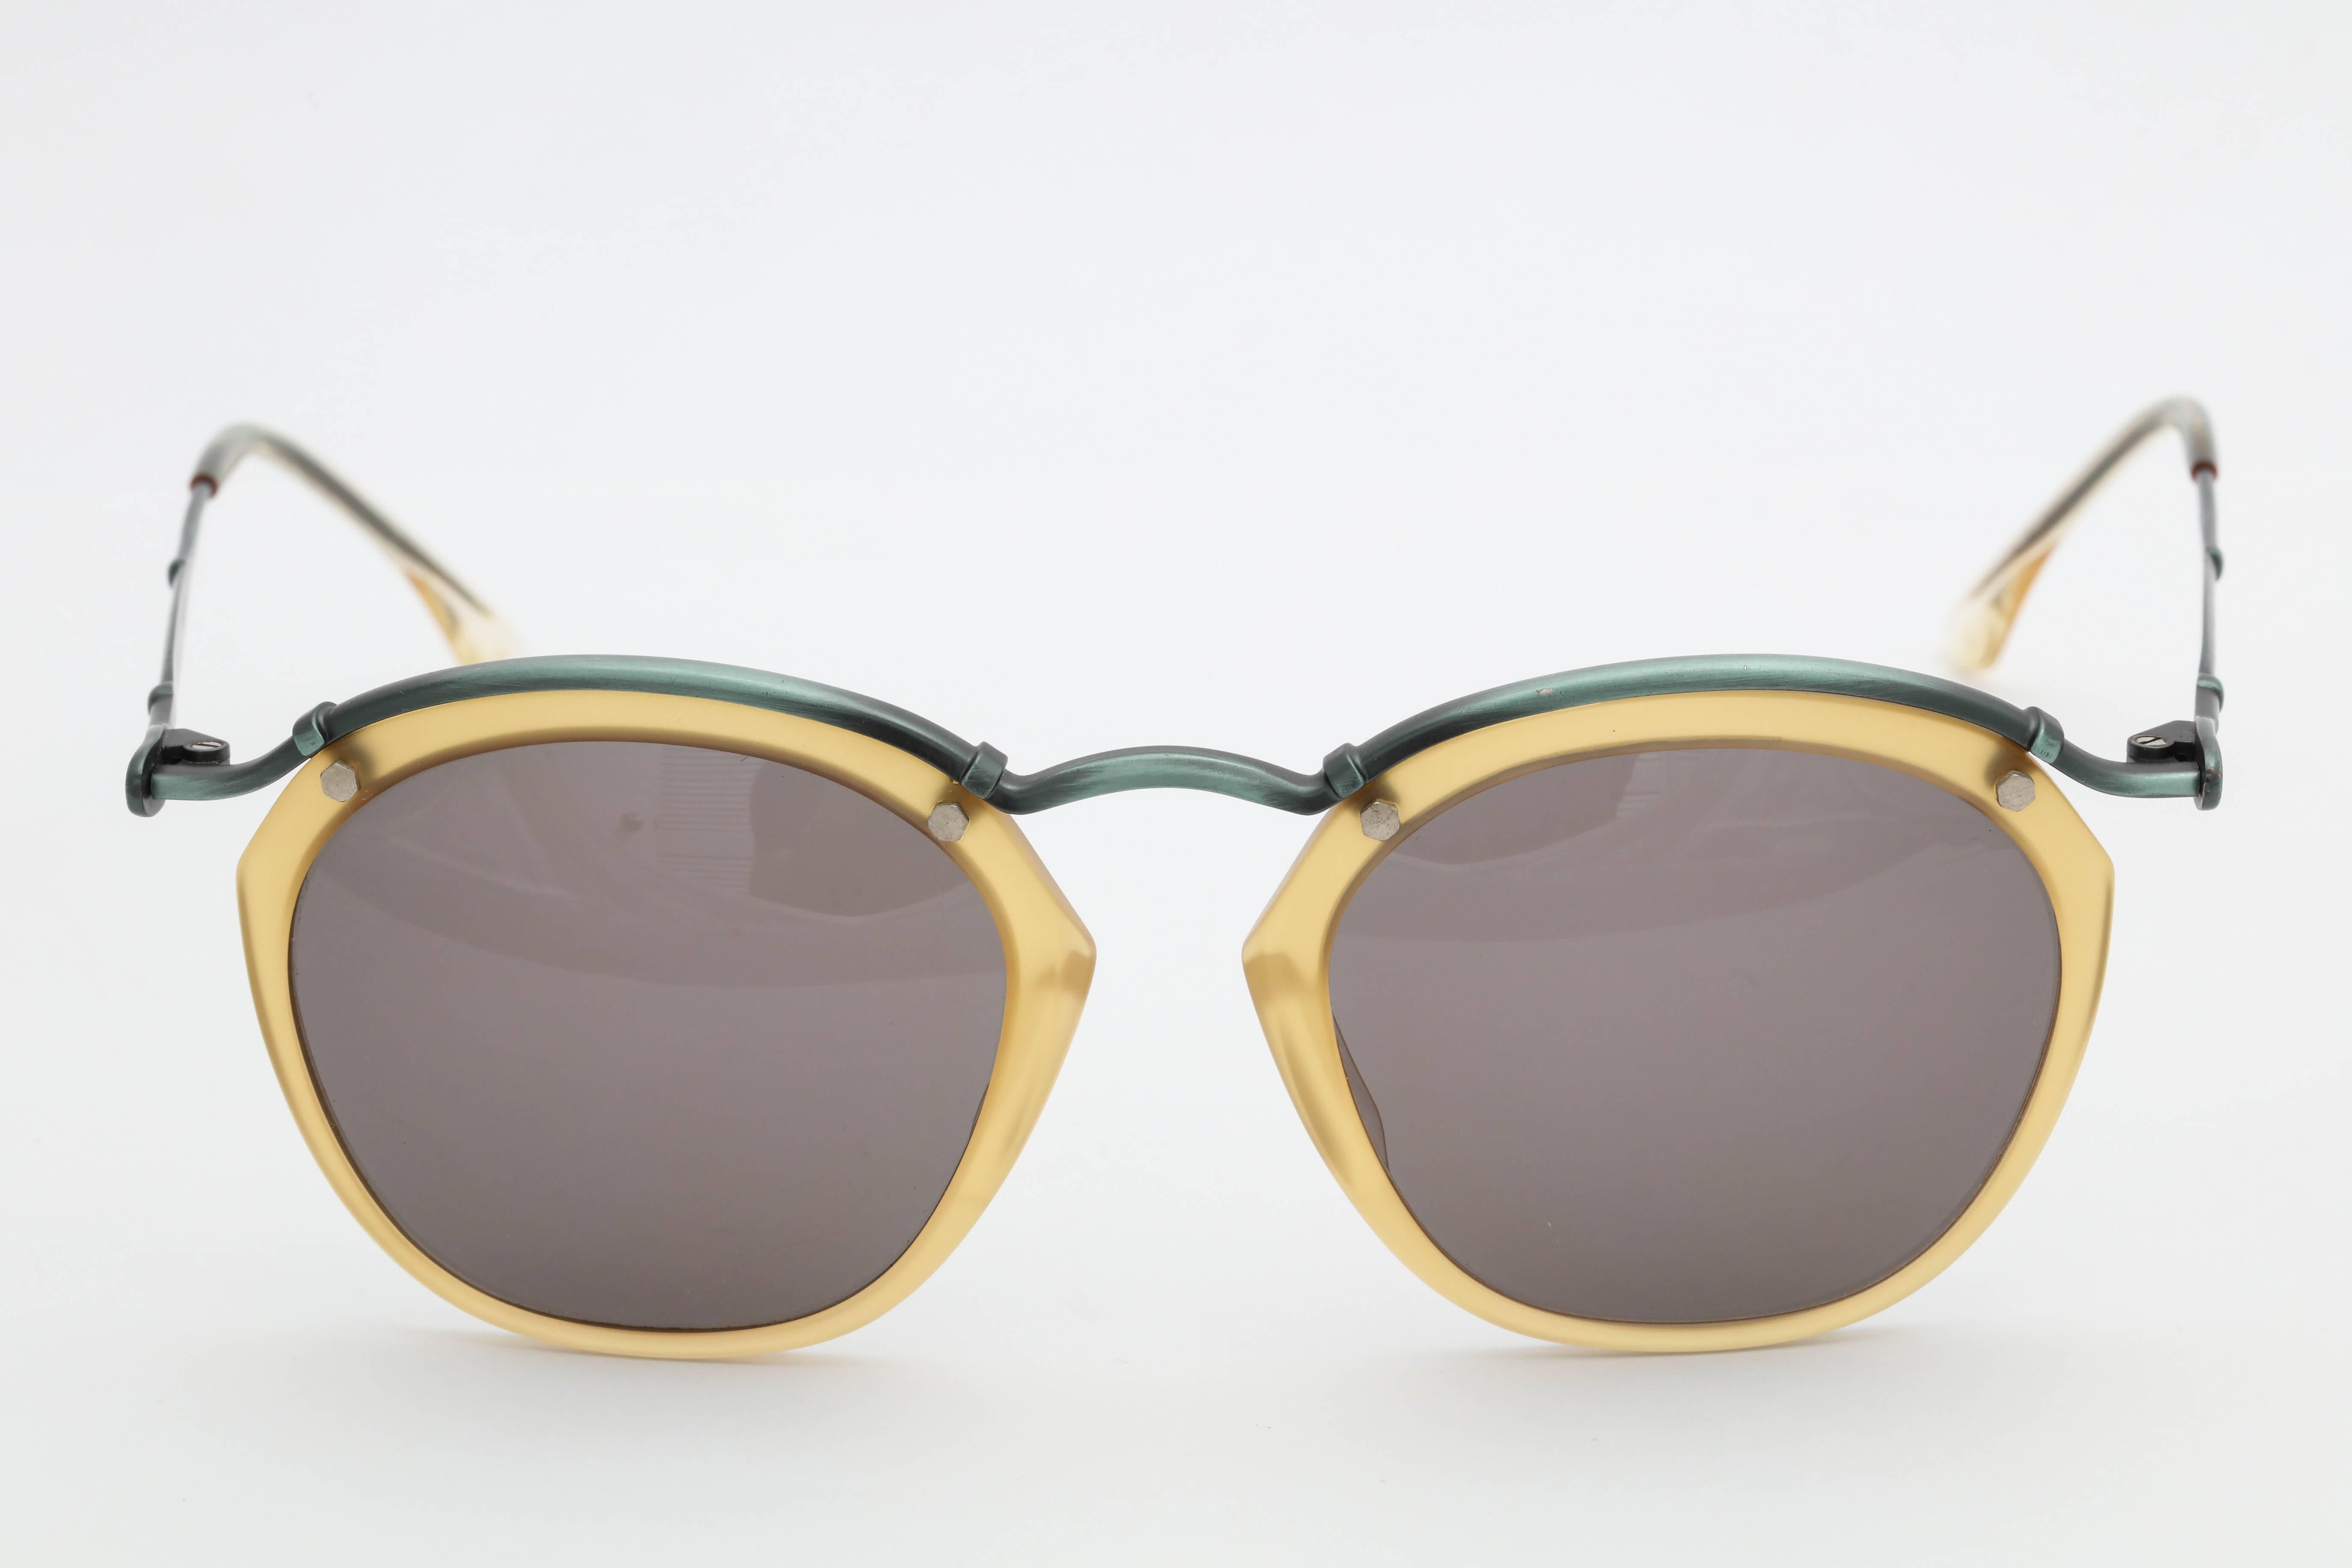 Jean Paul Gaultier Vintage Sunglasses 56-1273 In Excellent Condition For Sale In Chicago, IL